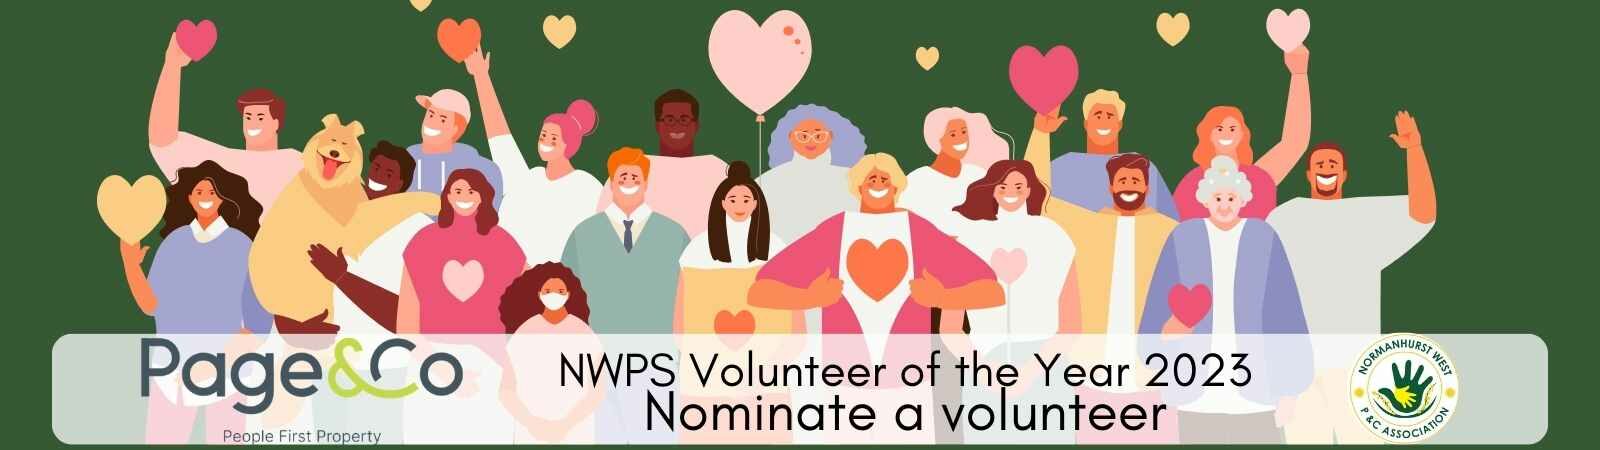 Nominate a Volunteer for Volunteer of the Year 2023!